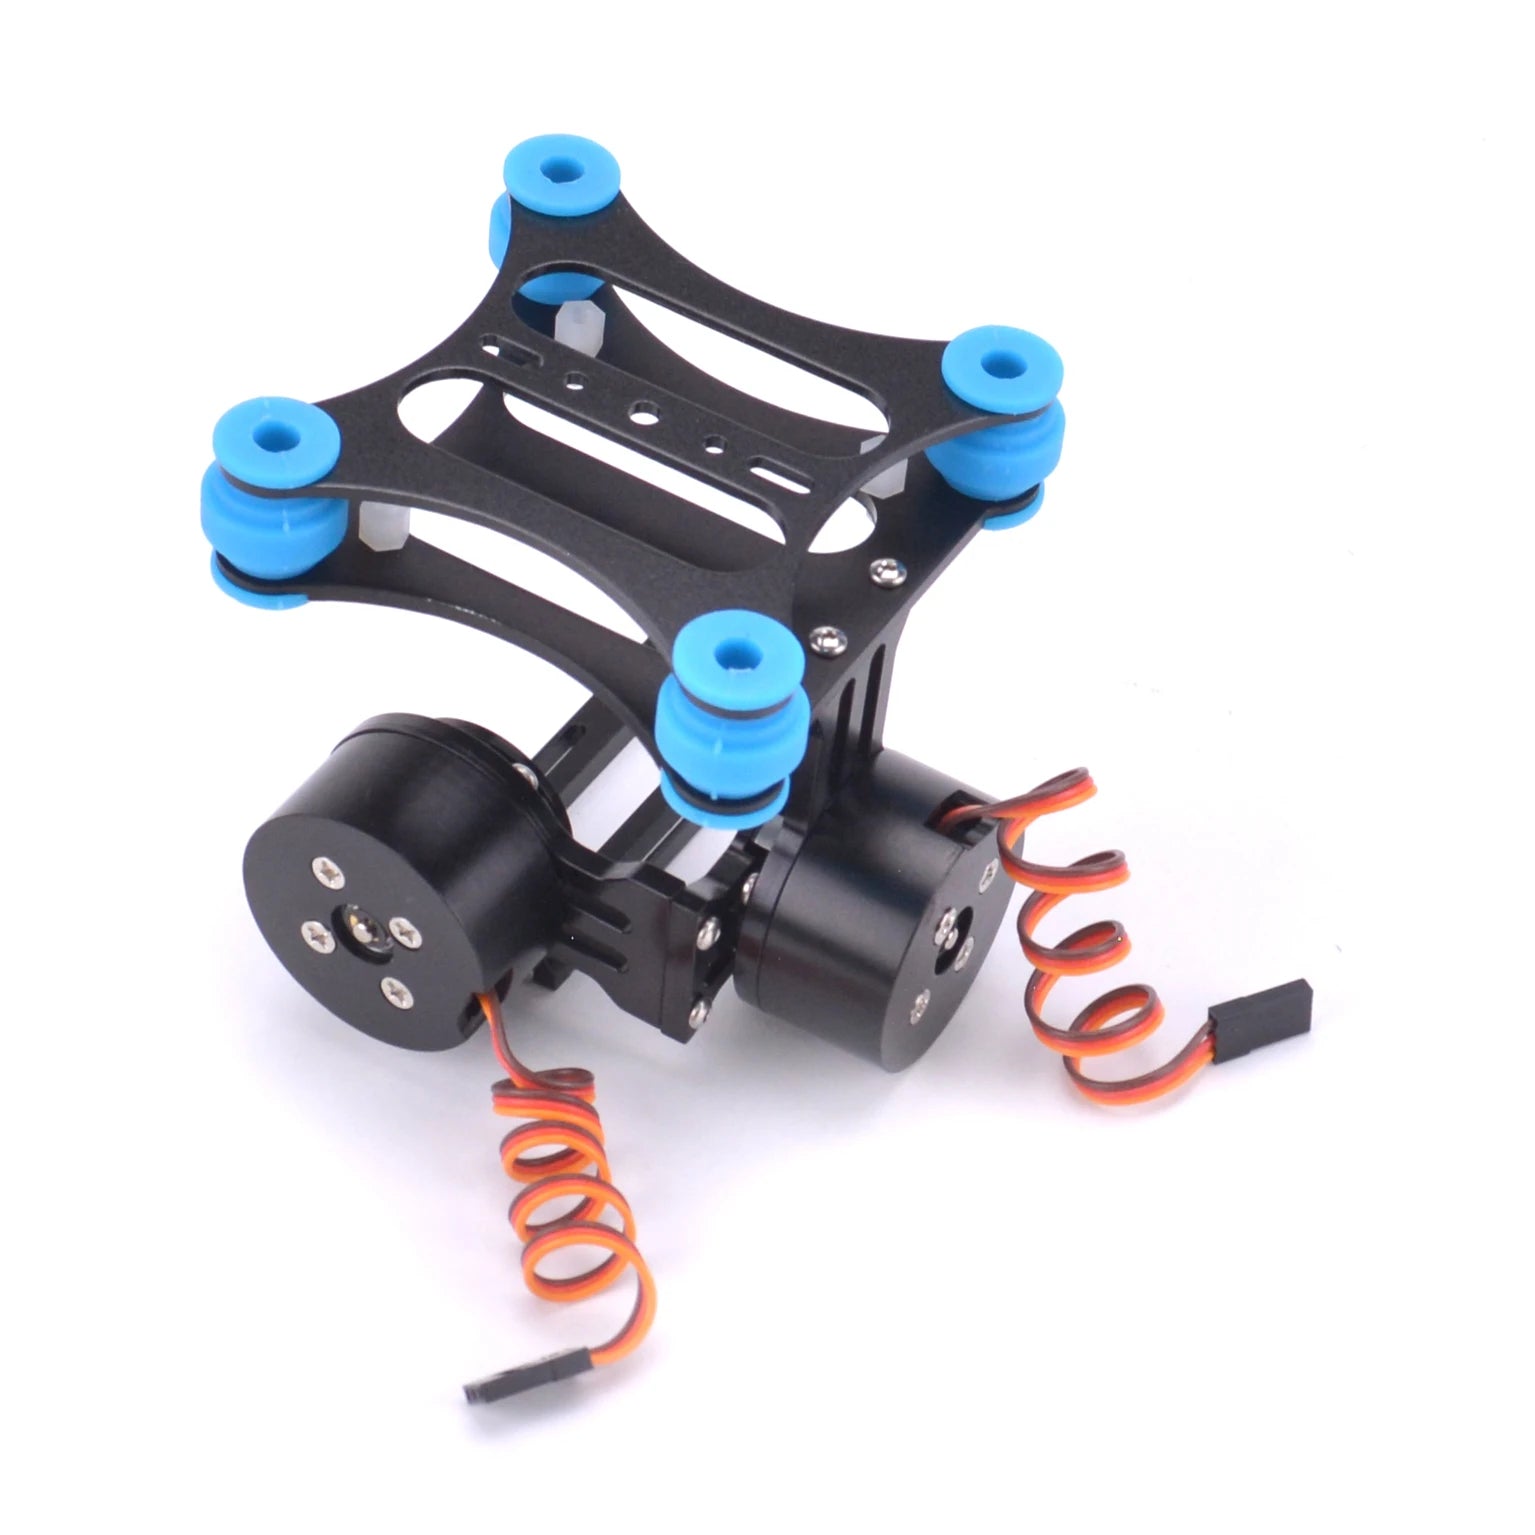 2-AXIS 2 Axis Brushless Gimbal, Features: Simple structure and light weight